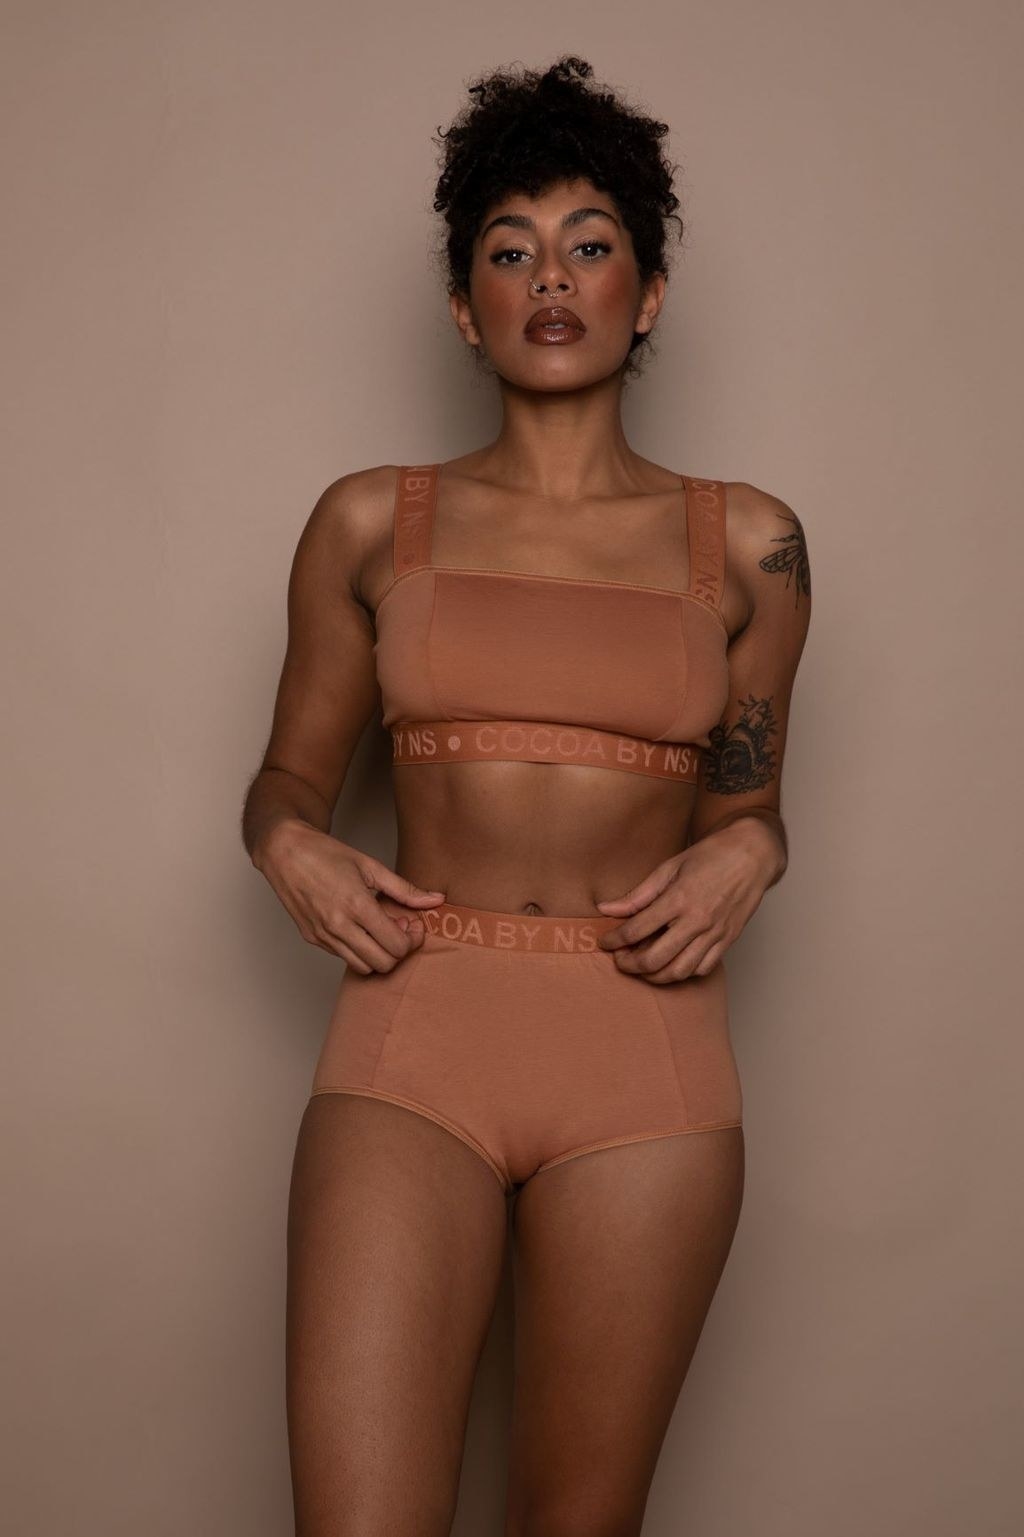 model wearing a nude-colored bralette and boy short